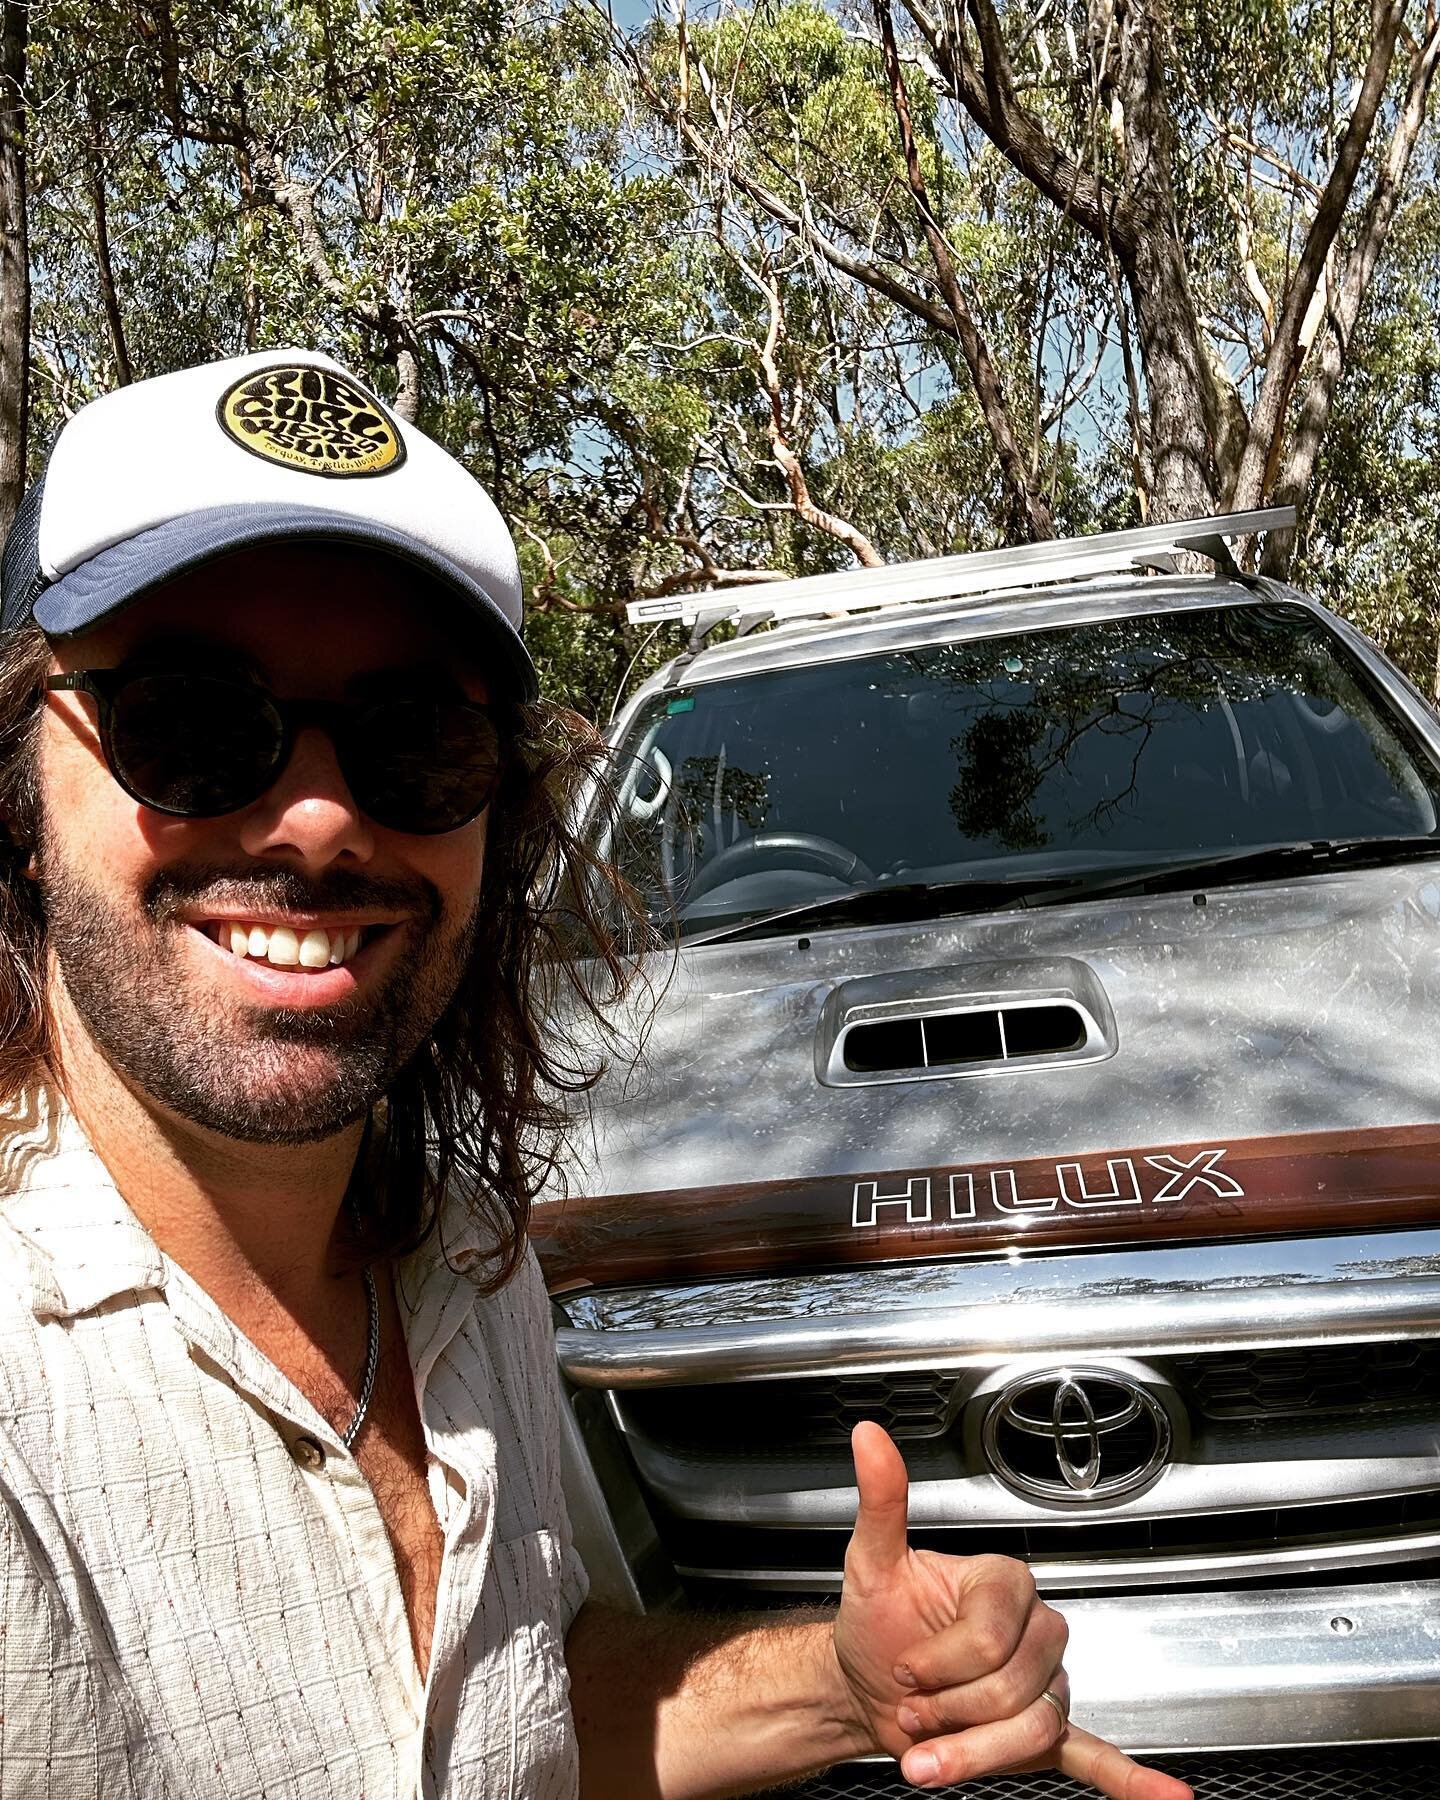 Got those new car vibes. Tested her out today at Emerald Pool. Celebratory dinner at Wisemans Ferry 
#hilux #adventure #offroad